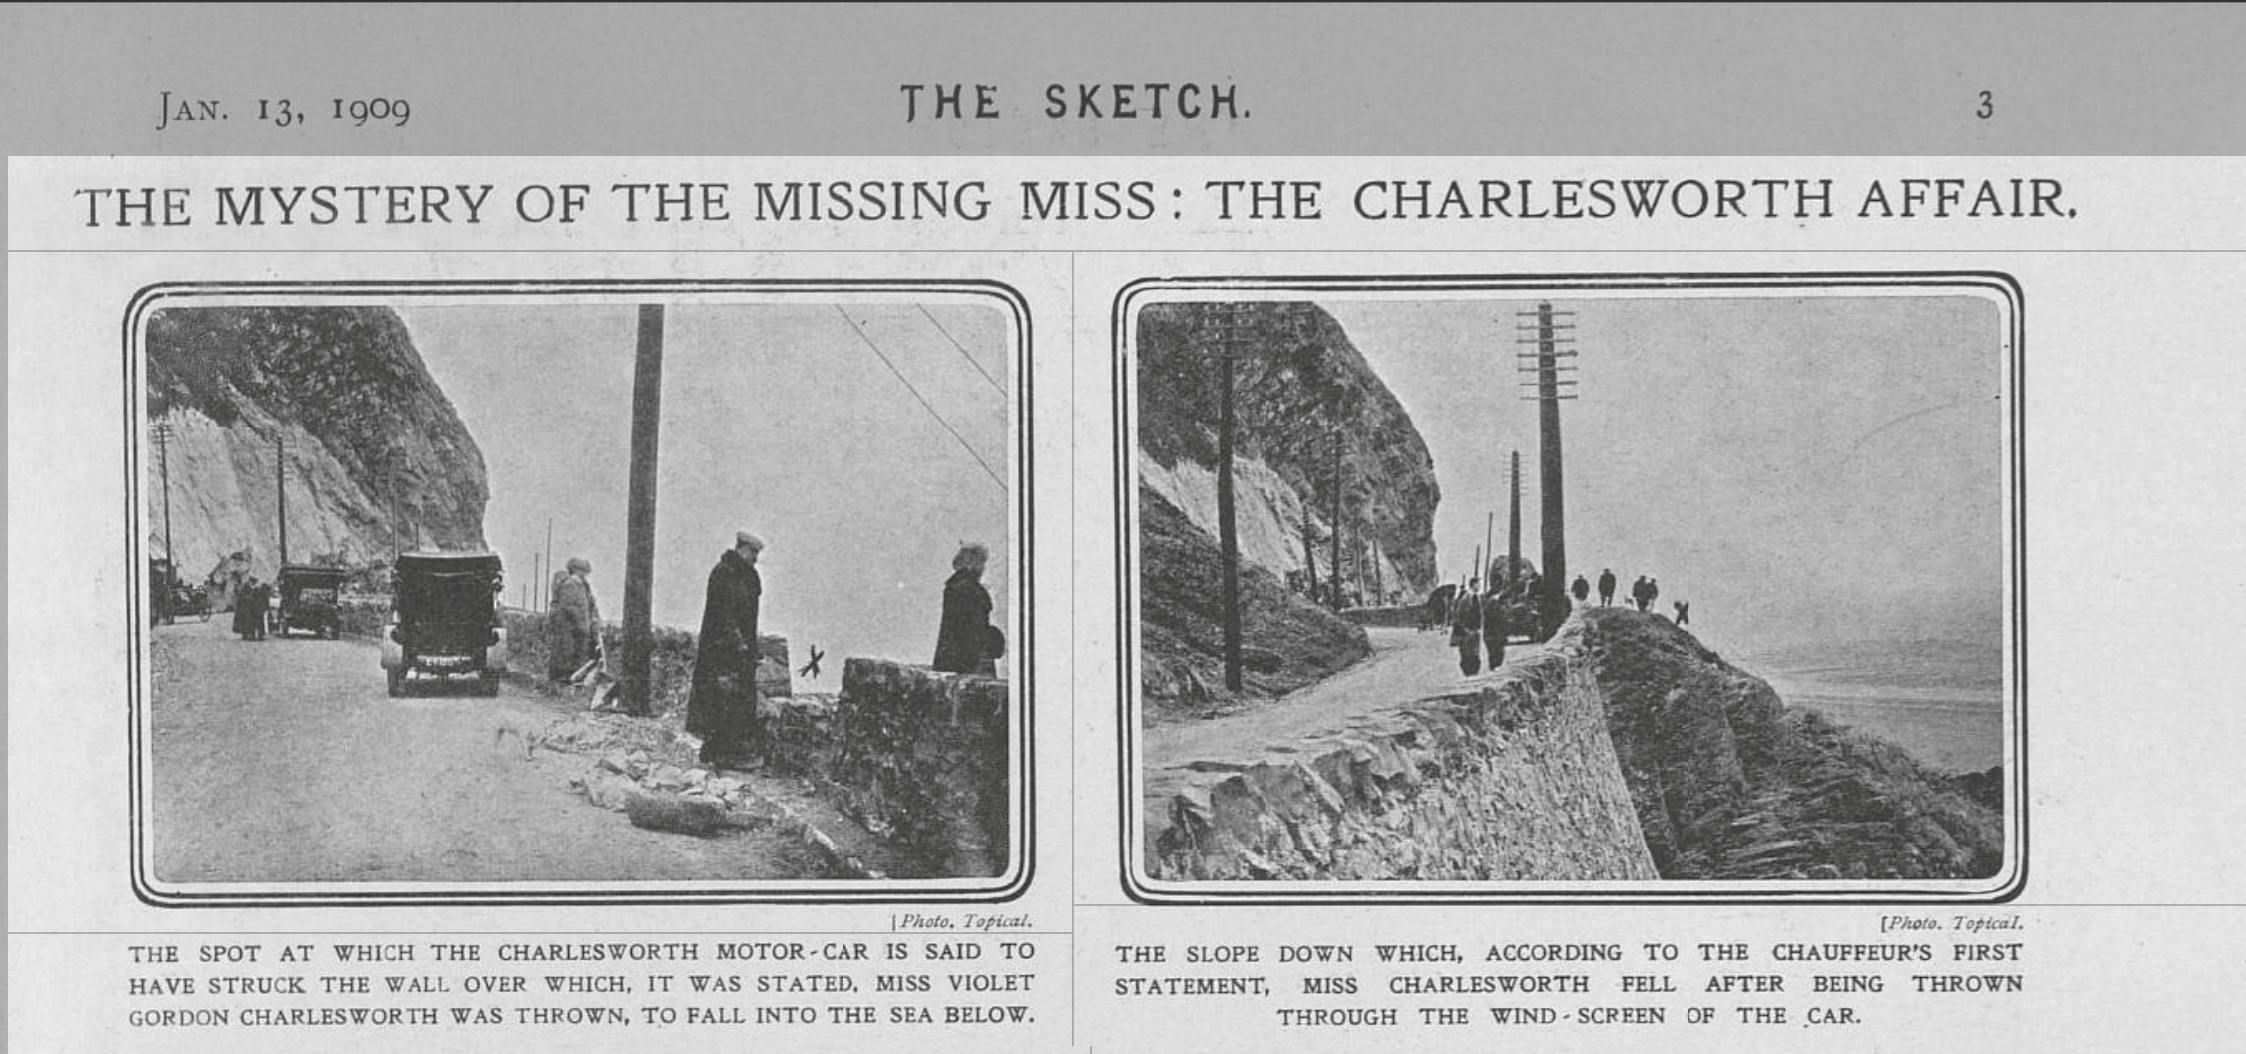 The Sketch, 13 January 1909.